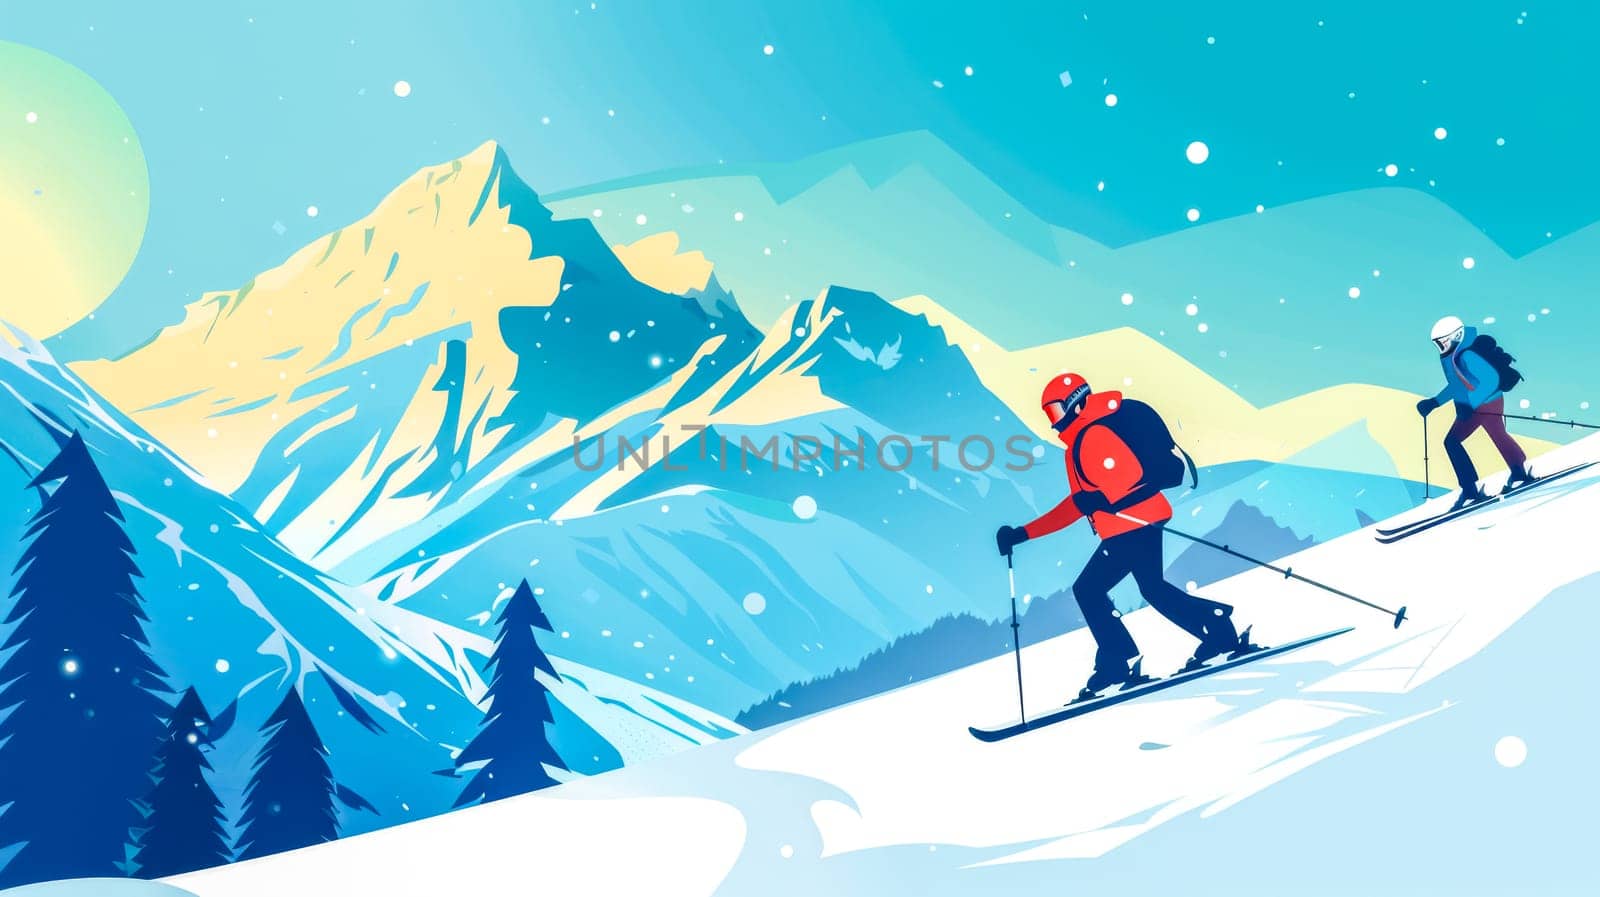 Vibrant illustration of skiers gliding down a snowy mountain landscape, imbued with a sense of motion and excitement